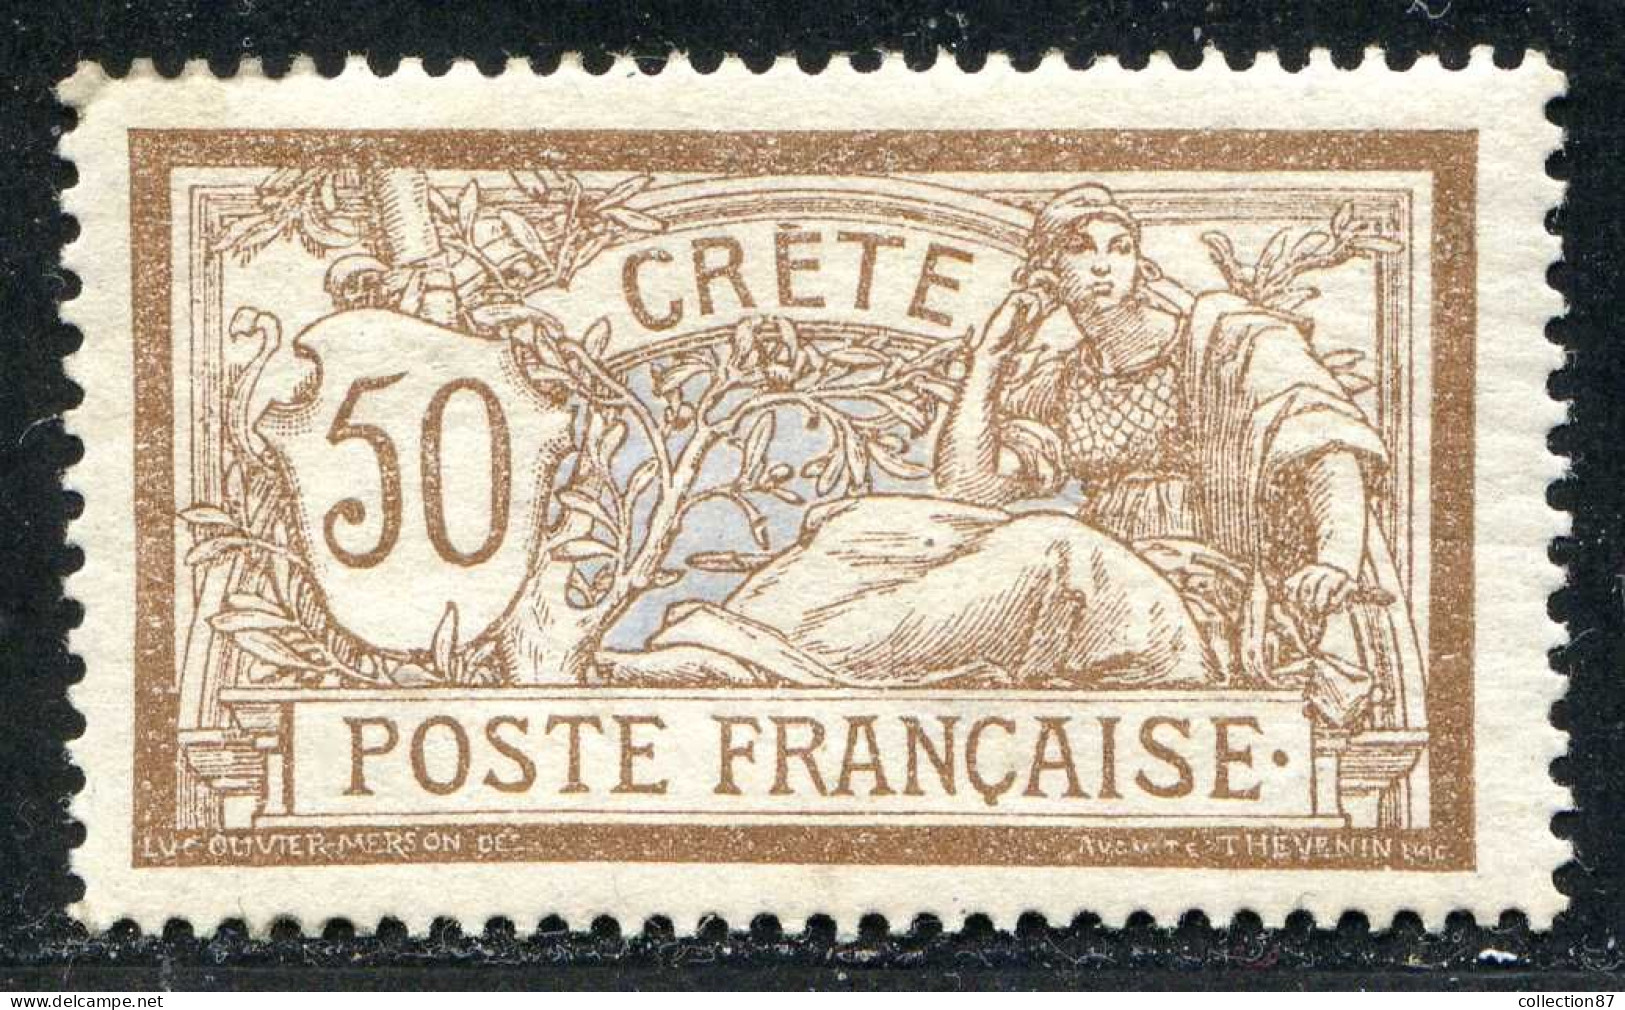 REF 091 > CRETE < Yv N° 12 * Centrage Correct < Neuf Ch. Dos Visible - MH * Cote 20 € - Unused Stamps